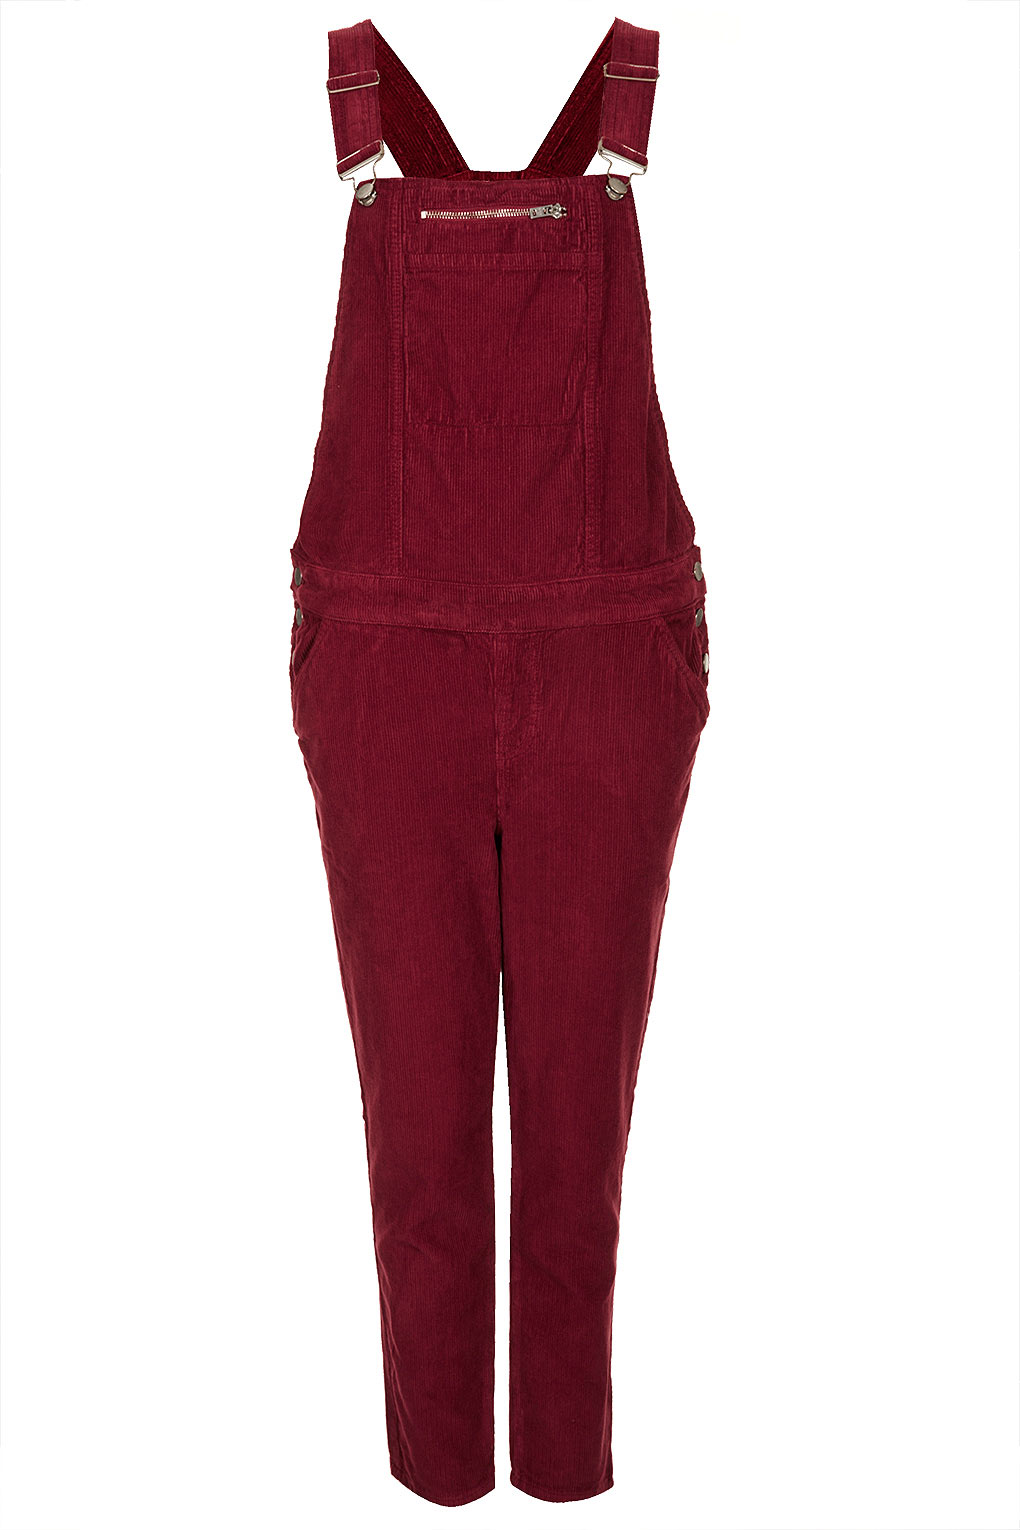 TOPSHOP Red Cord Dungarees - Lyst